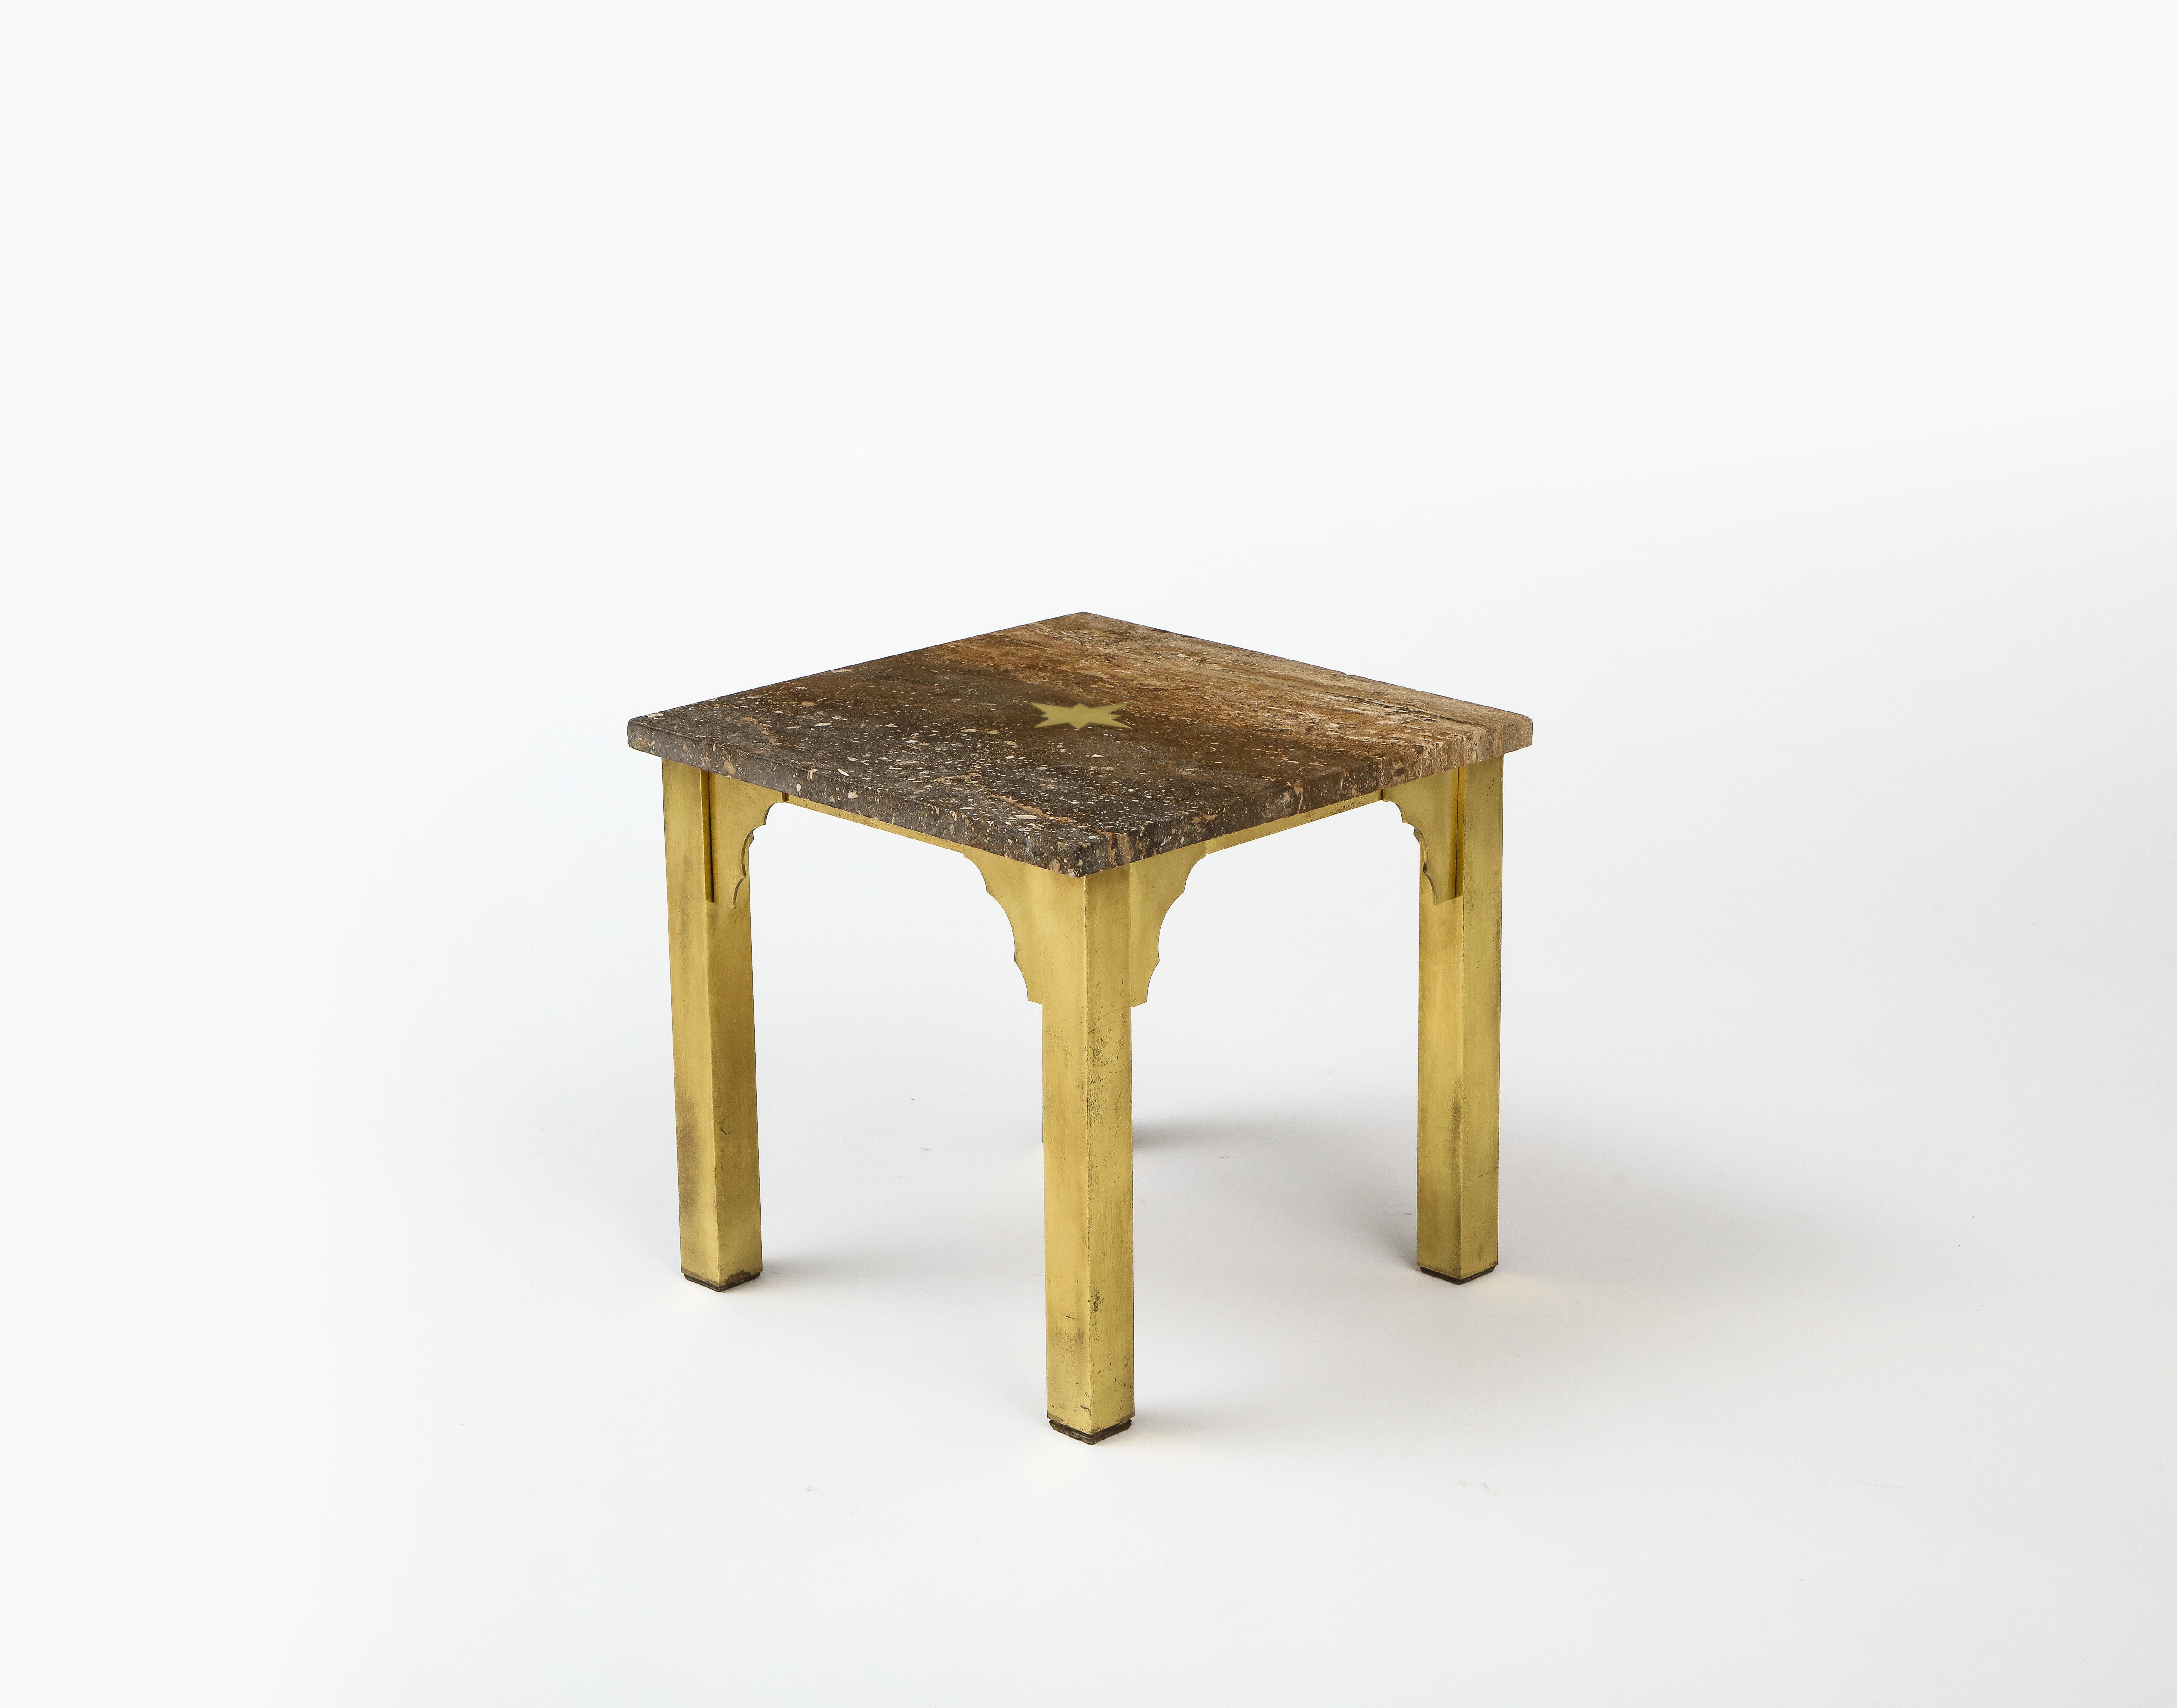 Small Square Table in Brass & Travertine, Inlay & Arabesque Details, USA 1960's For Sale 4